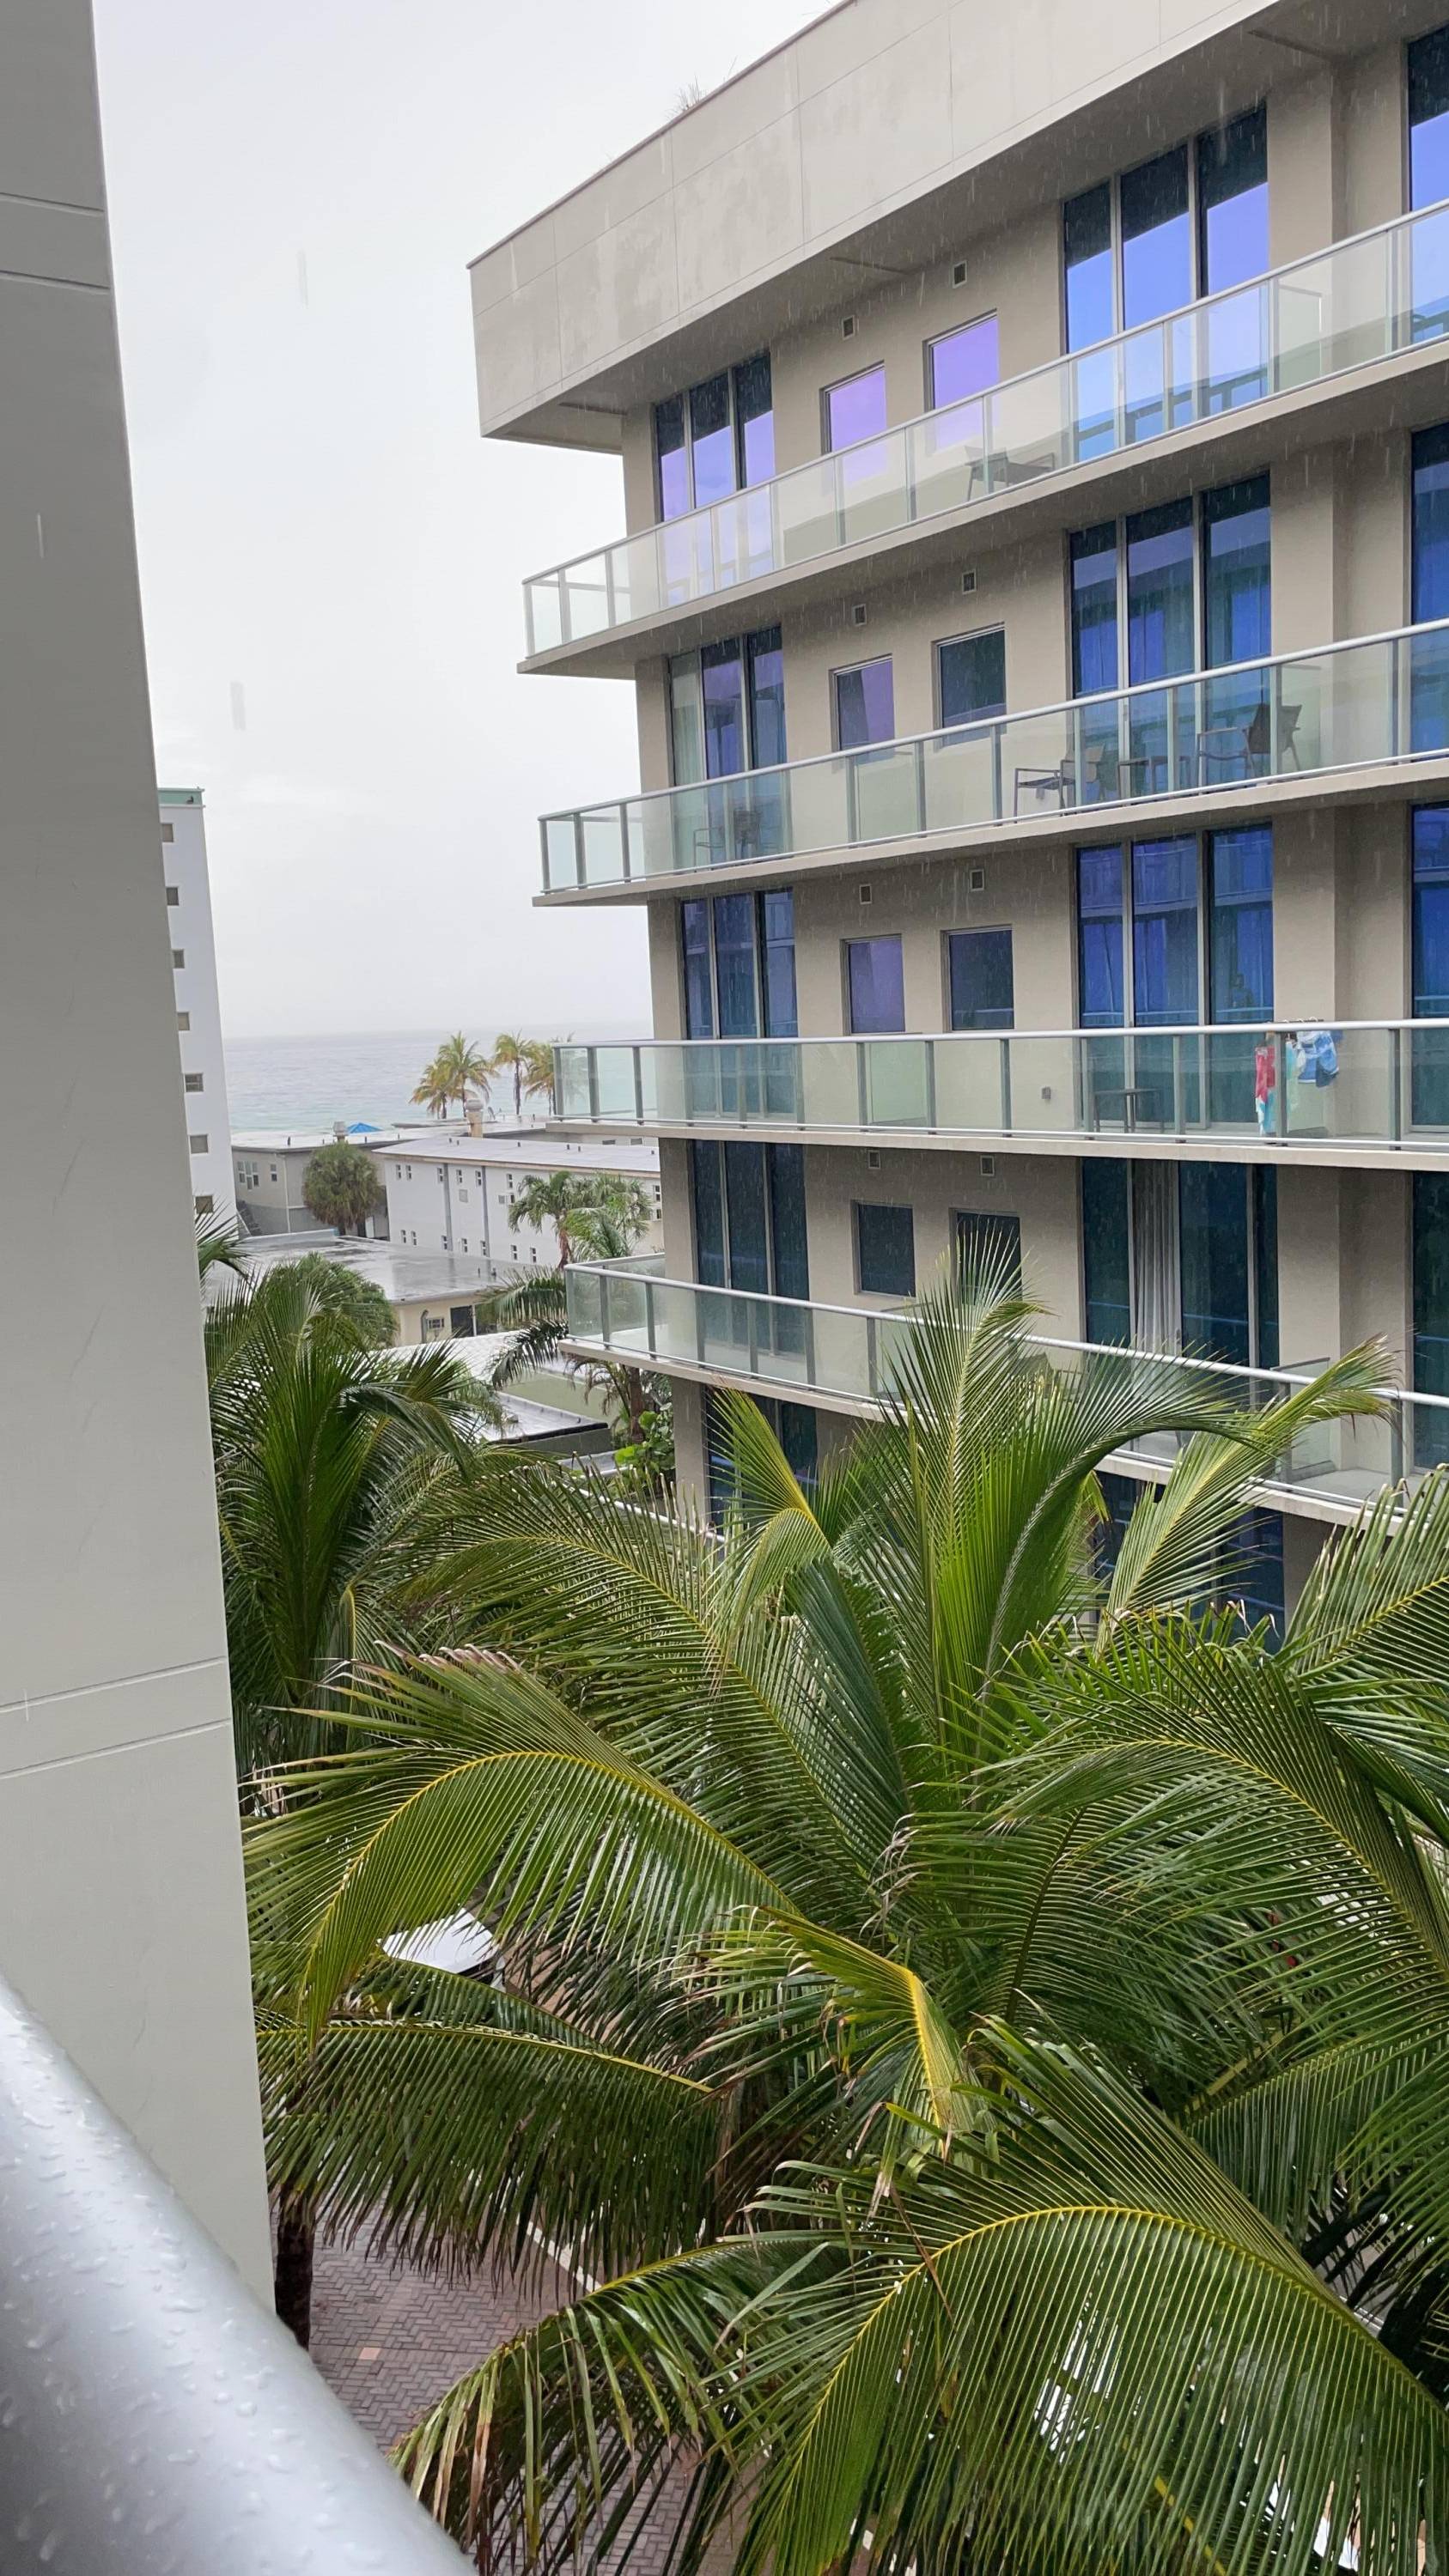 This upscale luxury condo is located just minutes away from the famed Hollywood Beach Boulevard a friendly beach community featuring stunning Atlantic coastline and a buzzing entertainment scene.